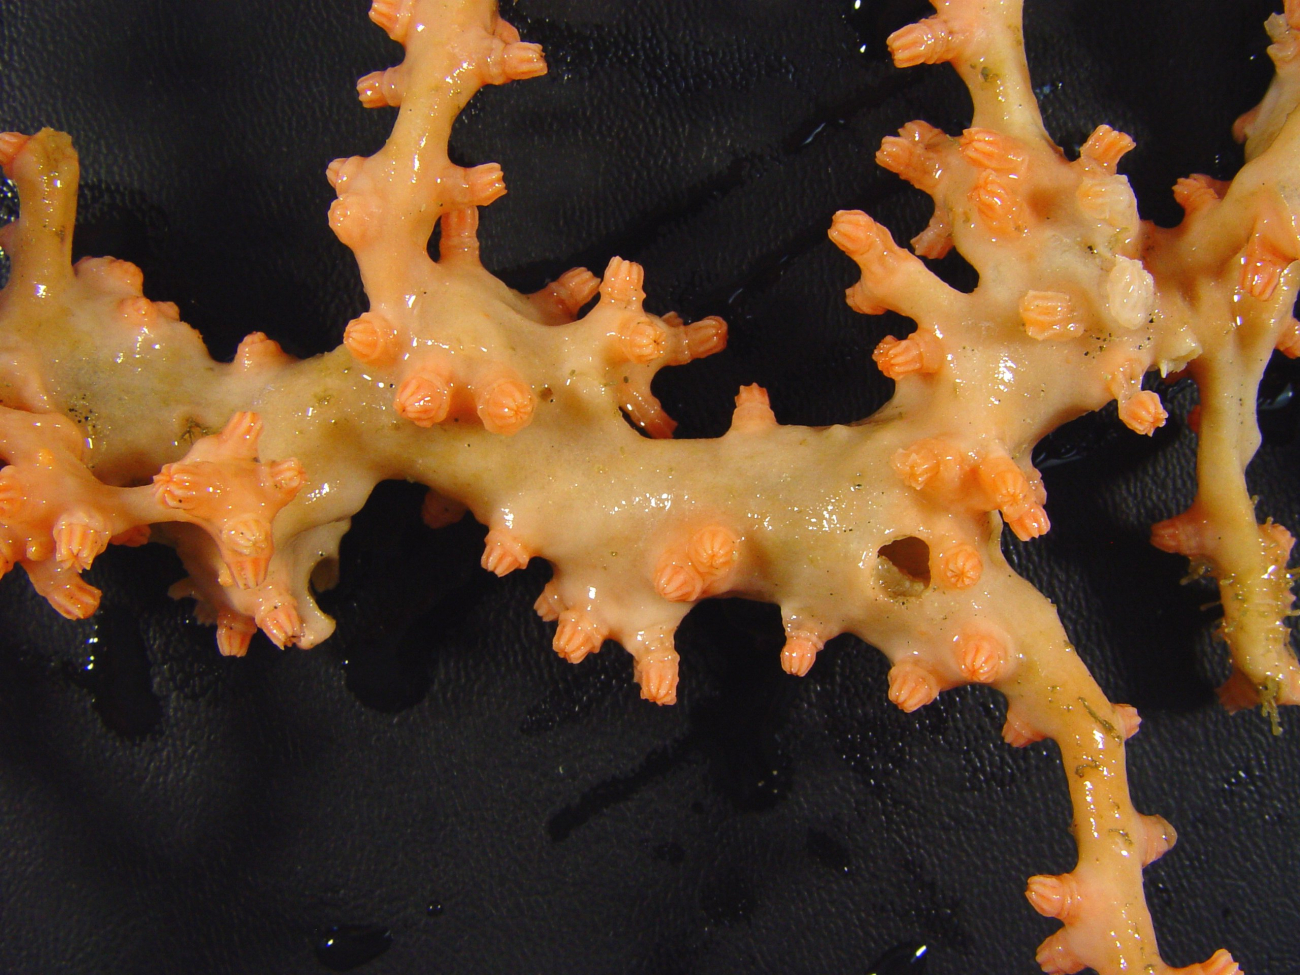 An orange octocoral